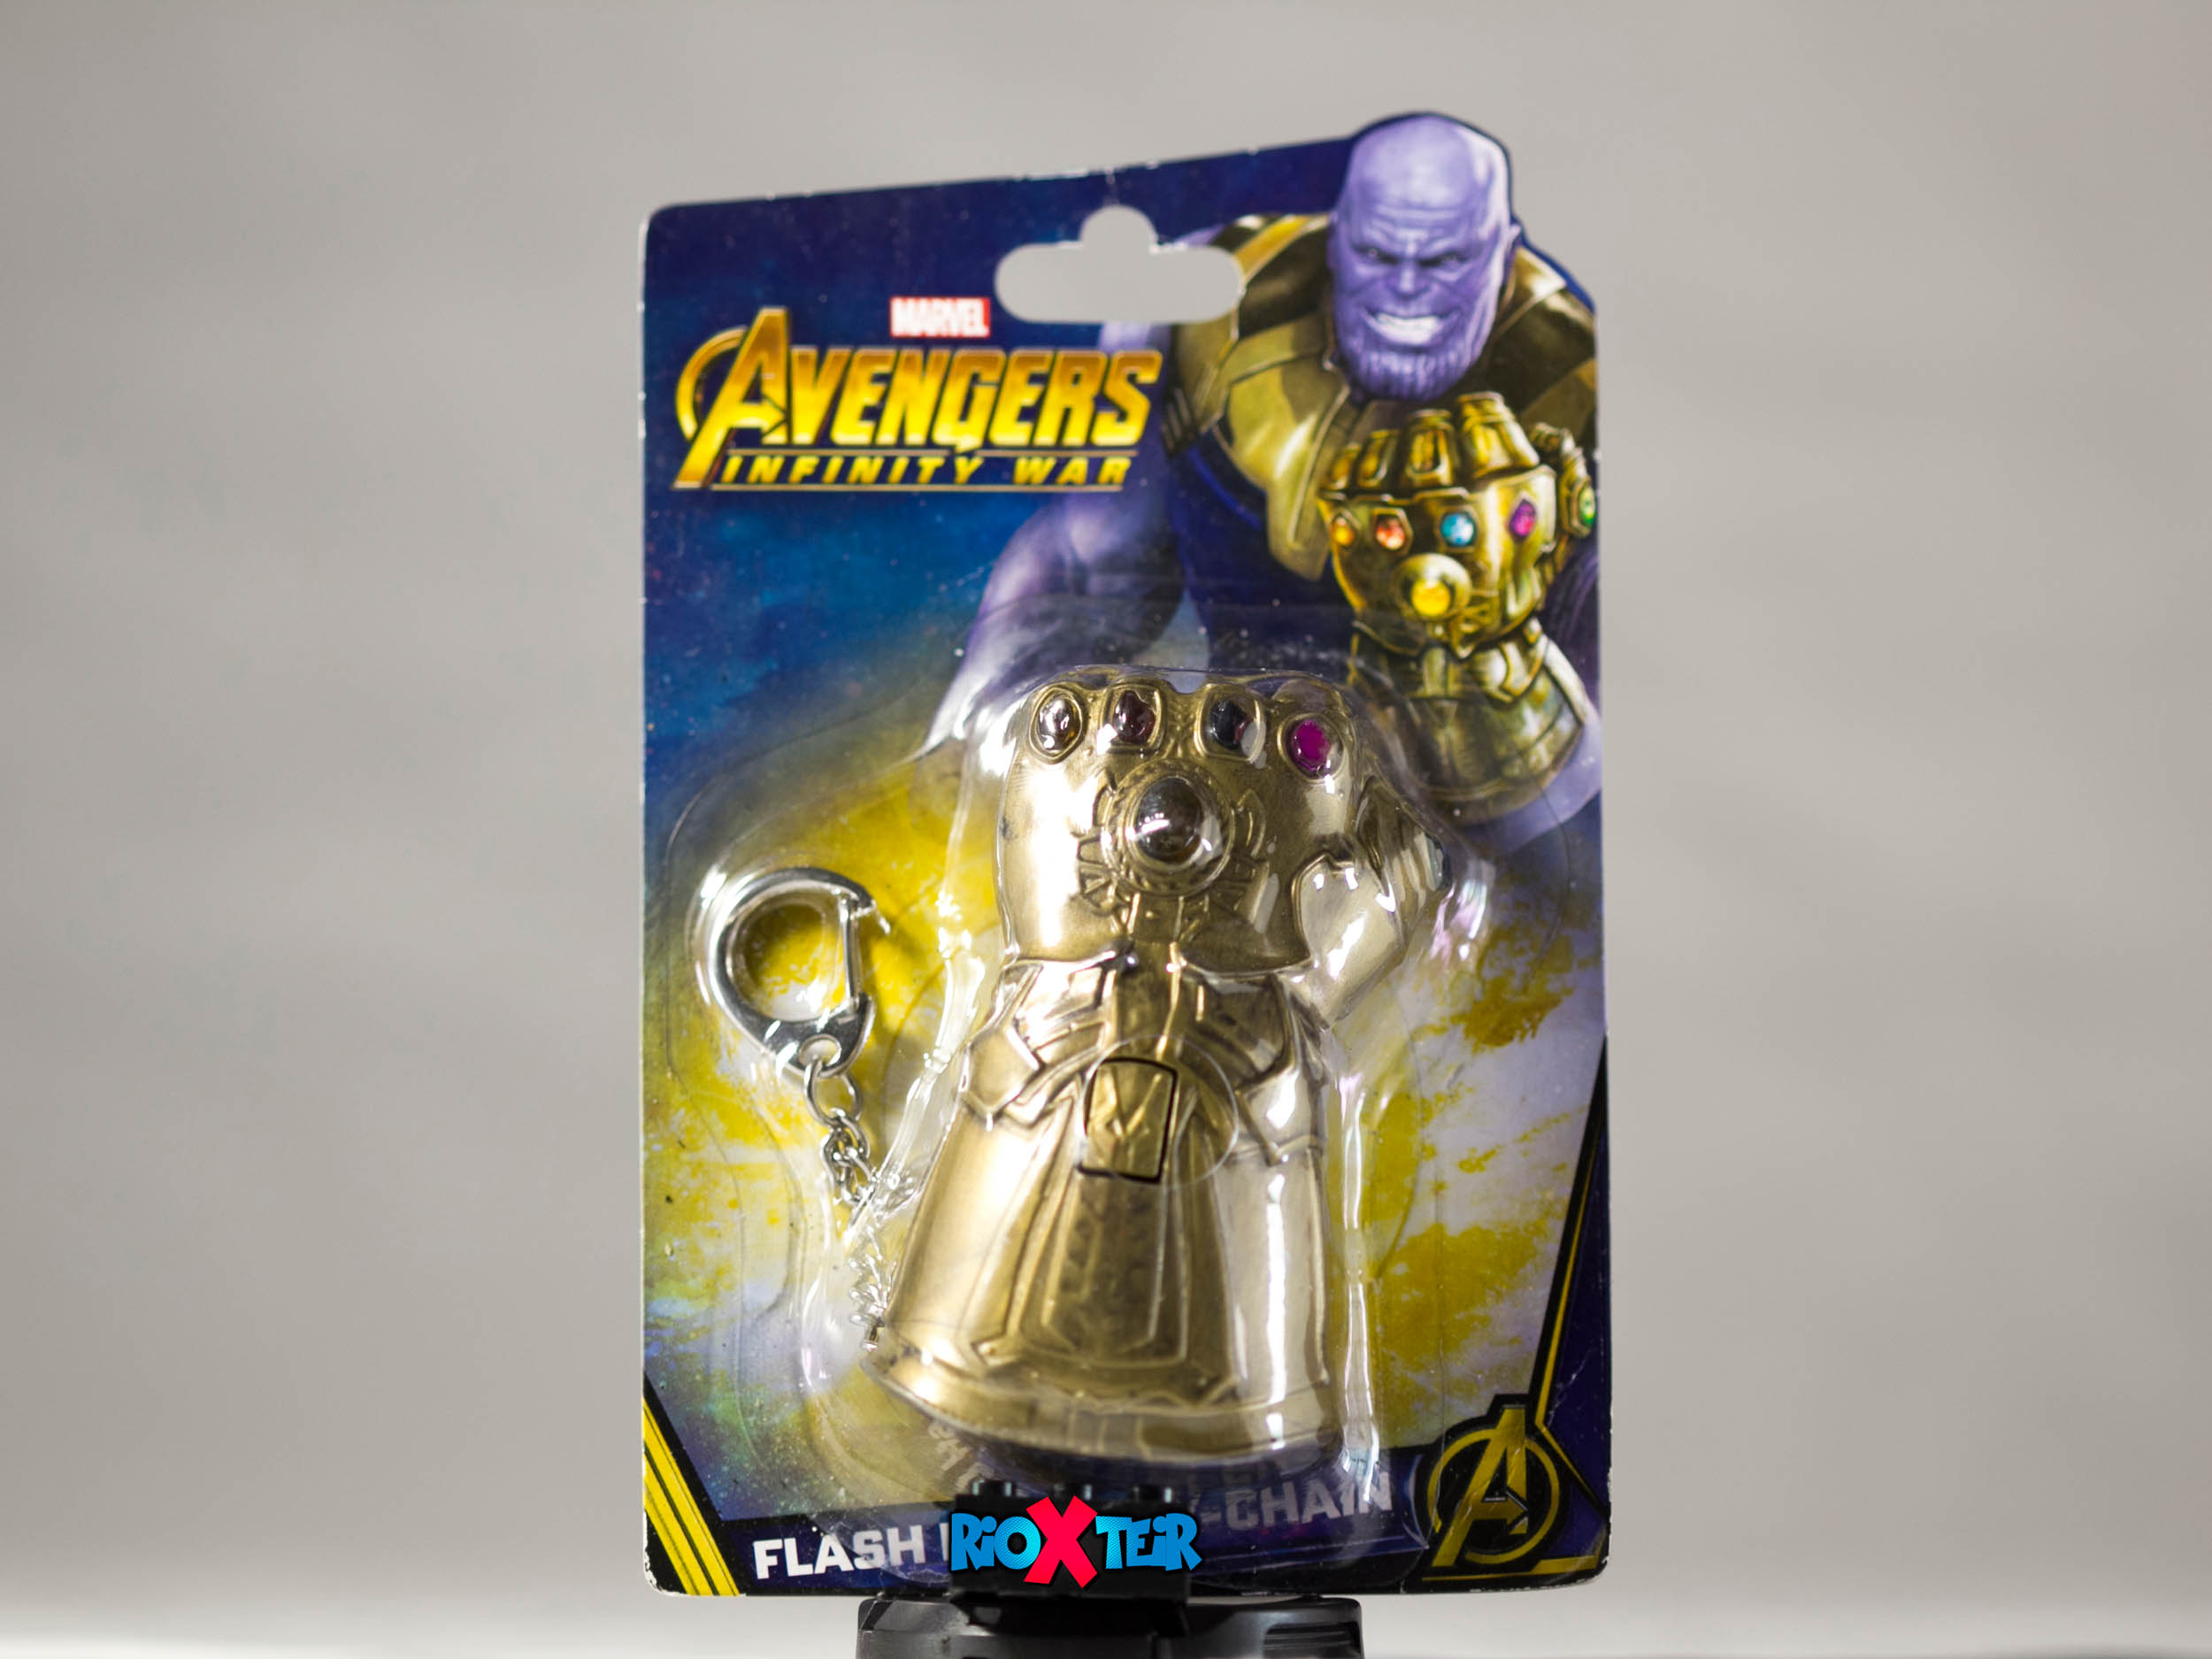 Avengers Infinity War Thanos Gauntlet Review